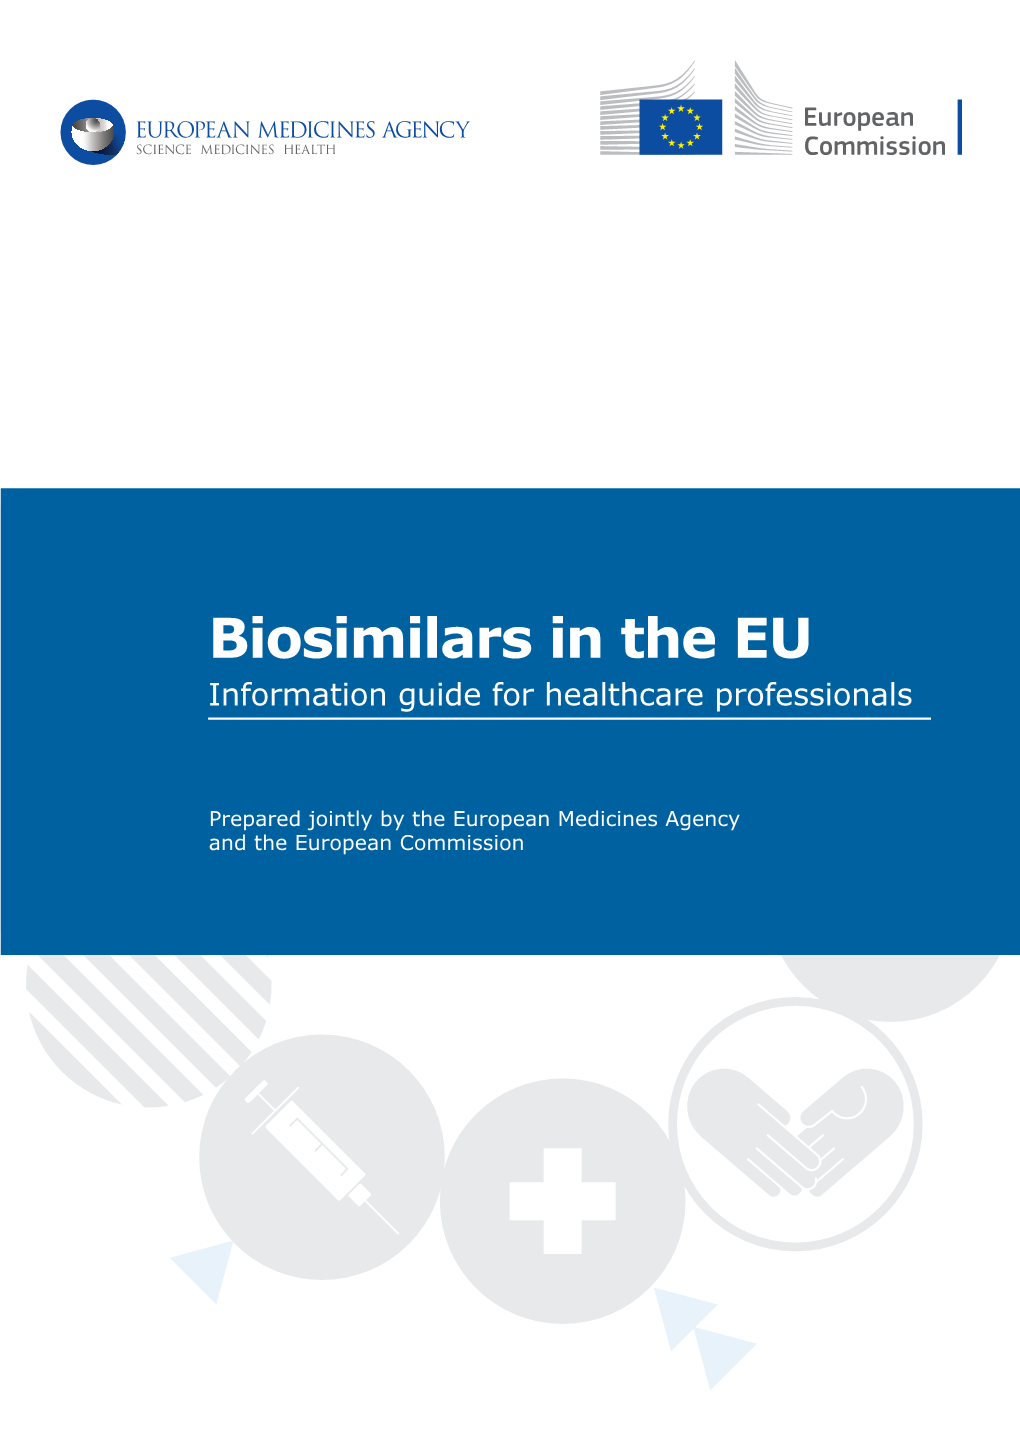 Biosimilars in the EU Information Guide for Healthcare Professionals